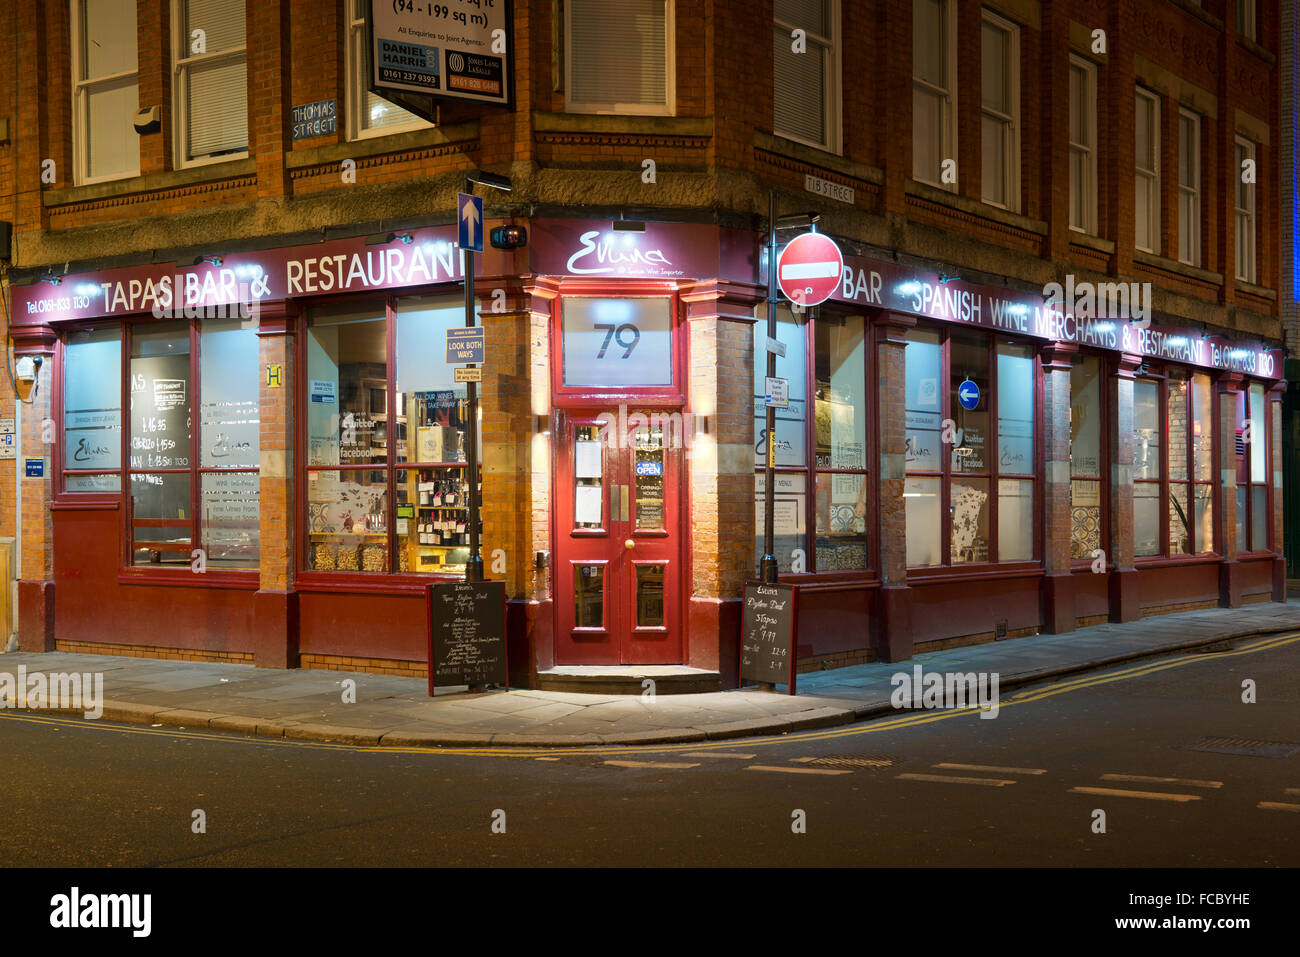 Evuna, the Spanish restaurant, Tapas bar and wine importer, located on the corner of Thomas Street and Tib Street in Manchester. Stock Photo